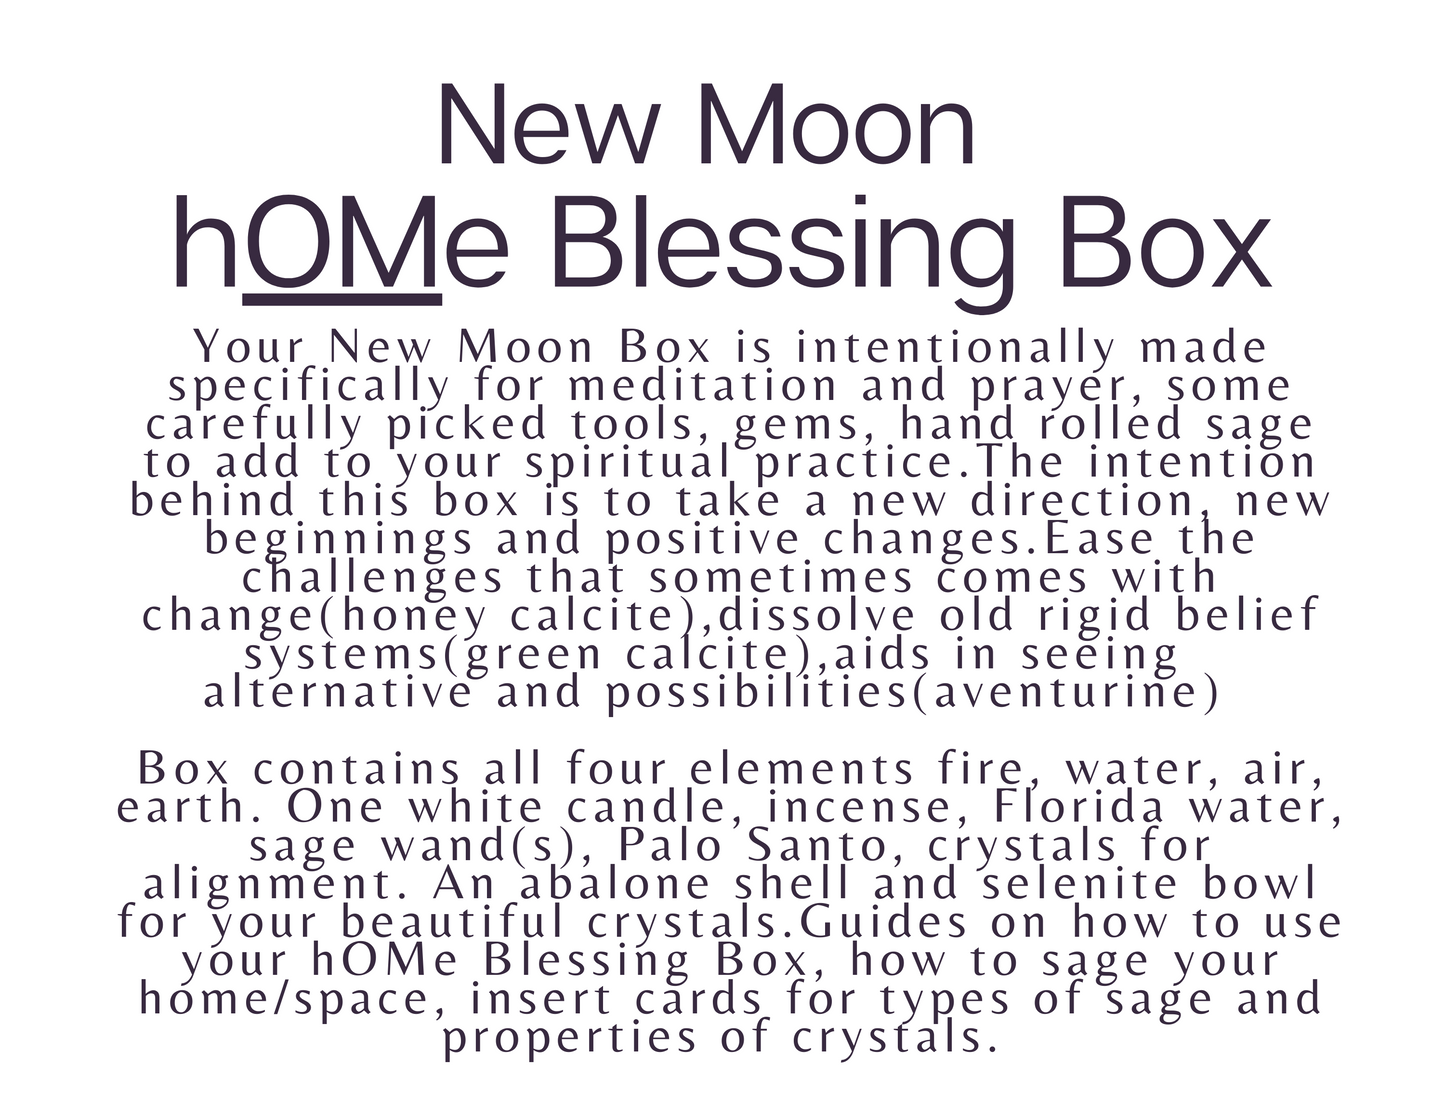 hOMe Blessing Box - A New Moon (New Beginnings)